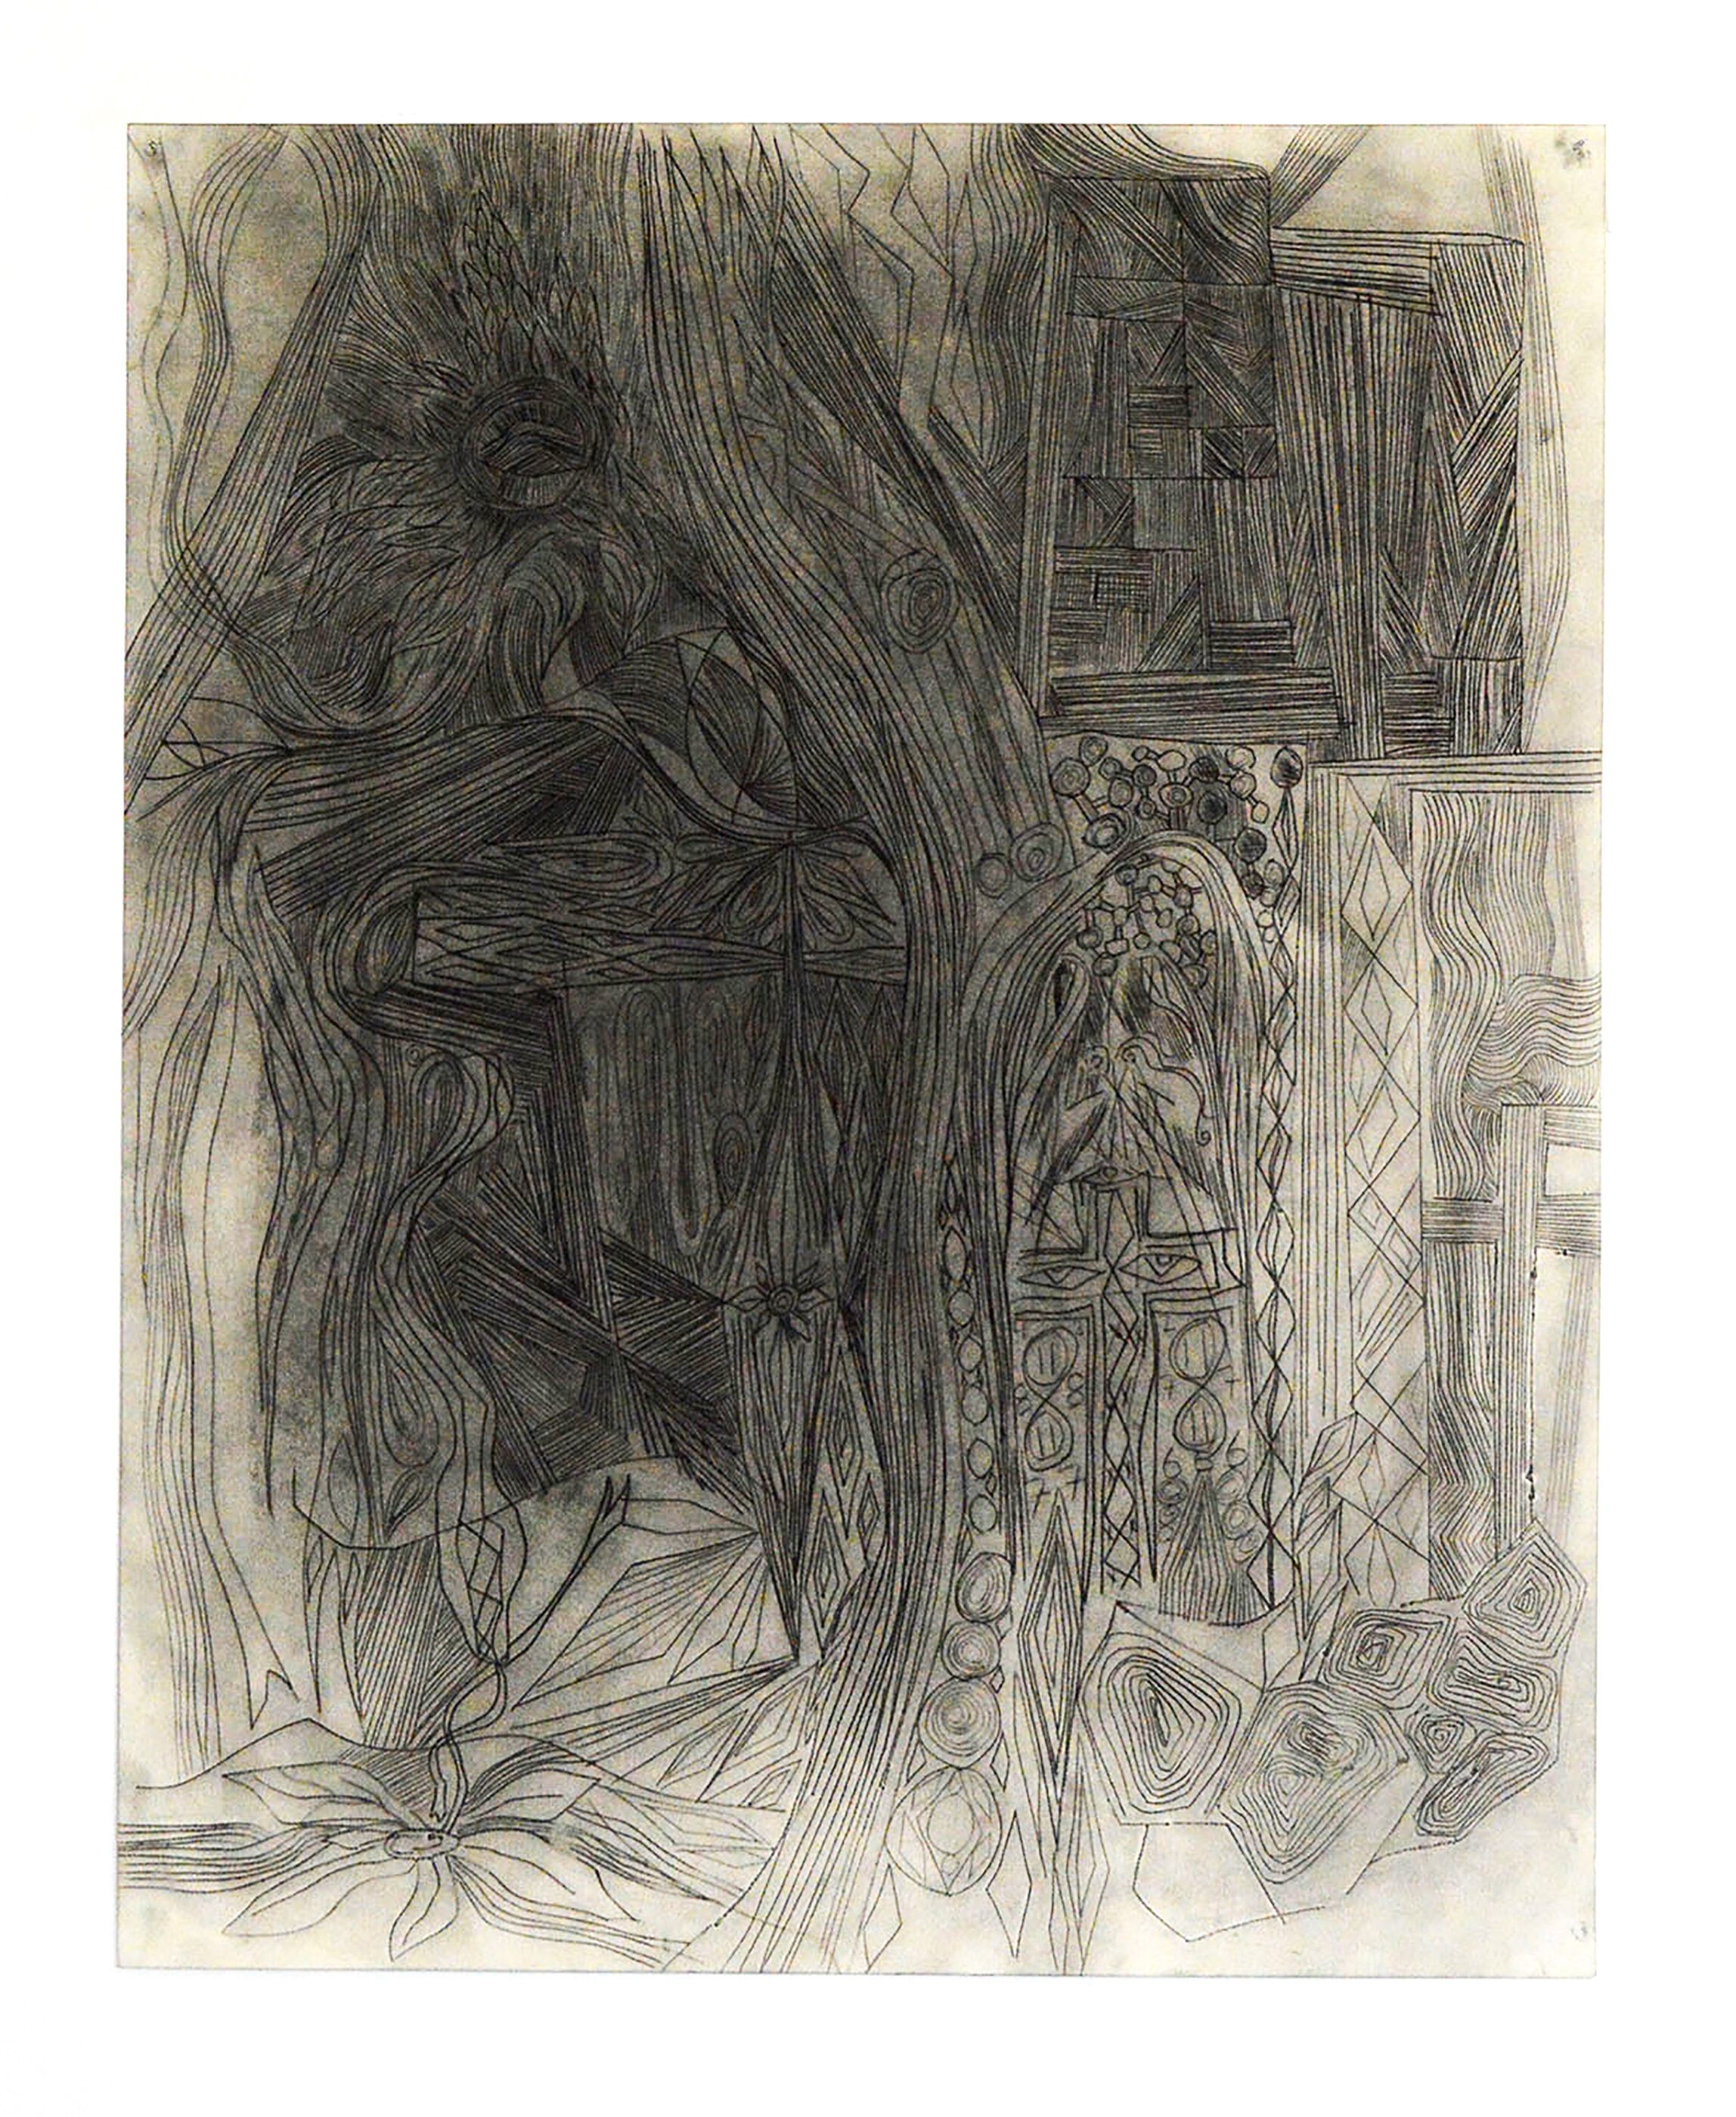 Untitled, 2016 - Charcoal, dust on etched paper - 30 x 25 inches